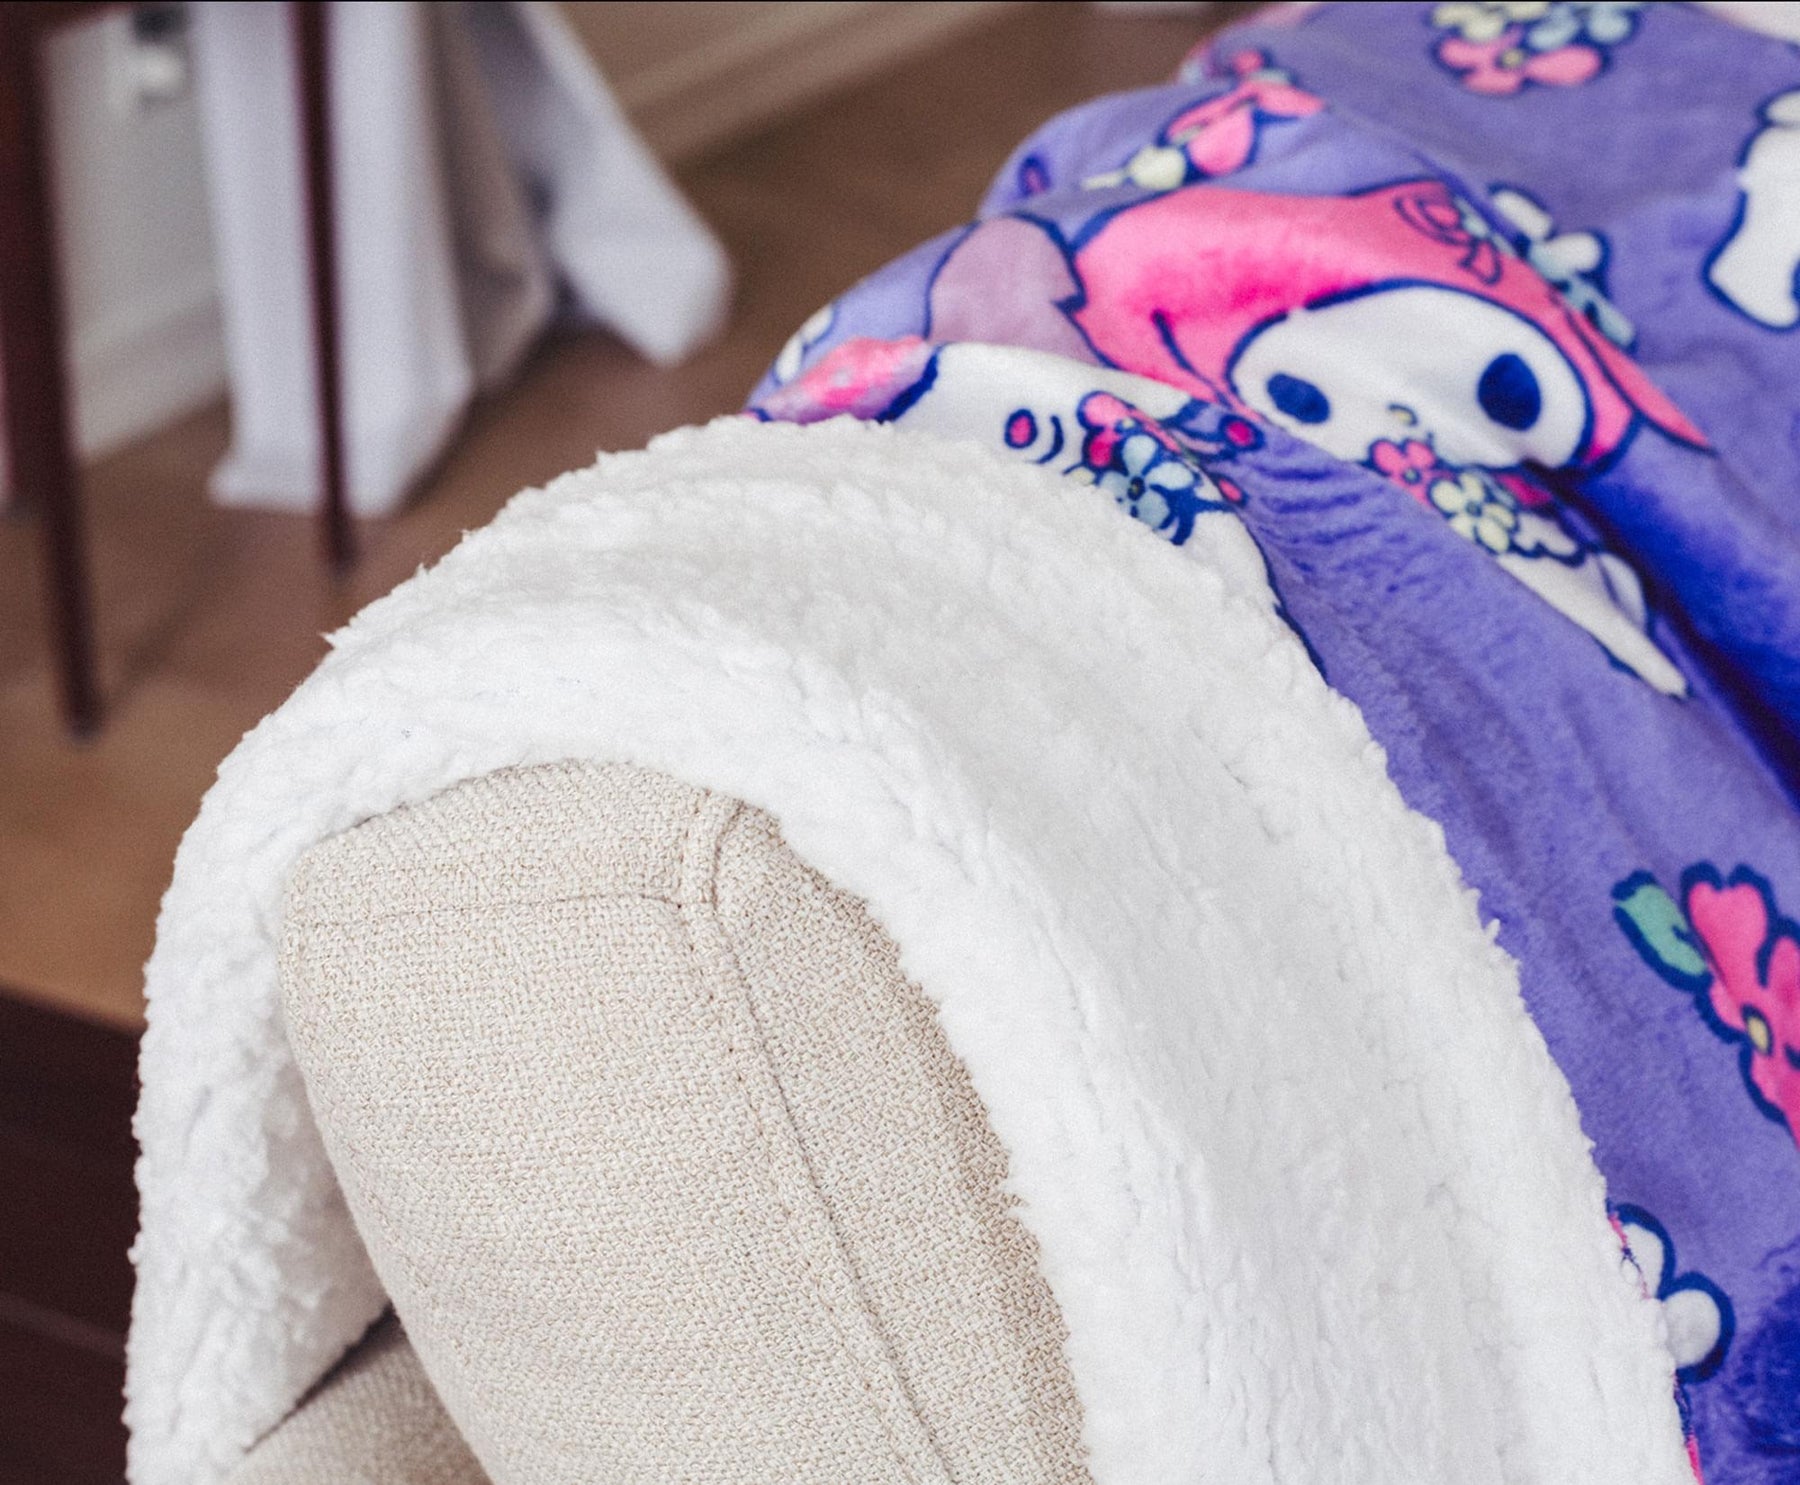 Sanrio My Melody and Kuromi Flower Baskets Sherpa Throw Blanket | 50 x 60 Inches